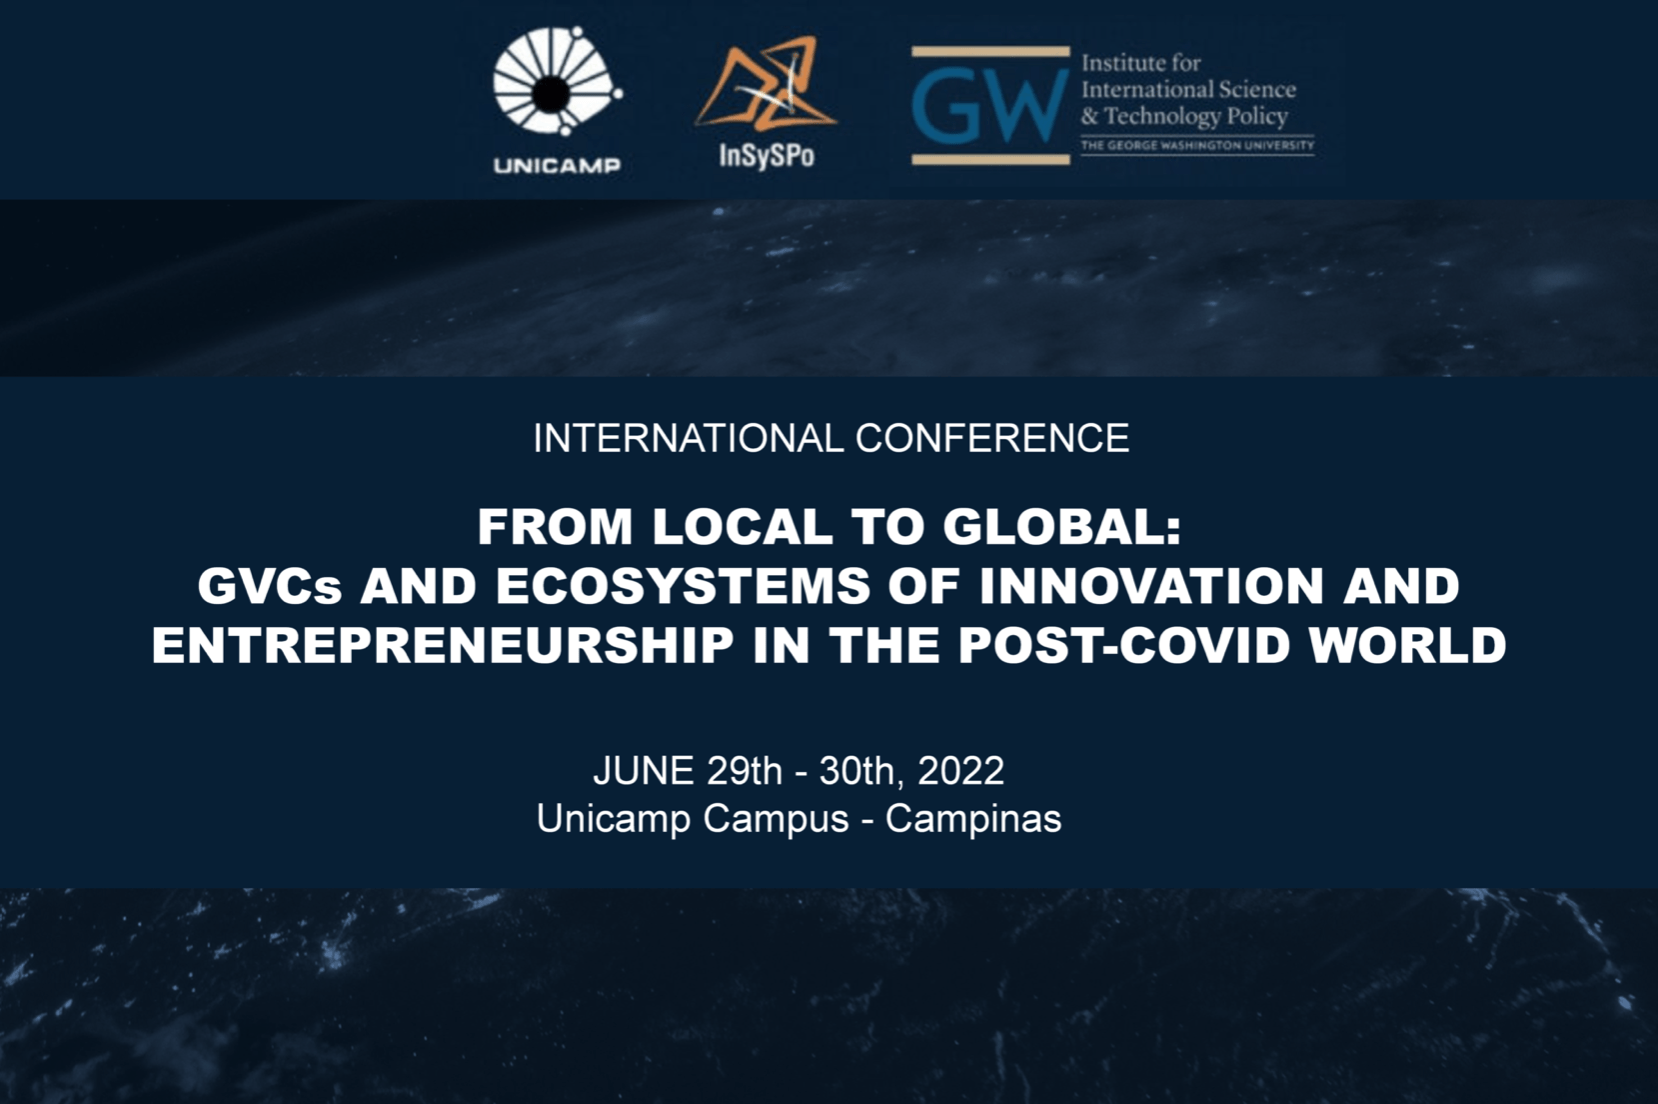 Graphic announcing international conferences: From Local to Global: GVCs and Ecosystems of Innovation and Entrepreneurship in the Post-Covid World